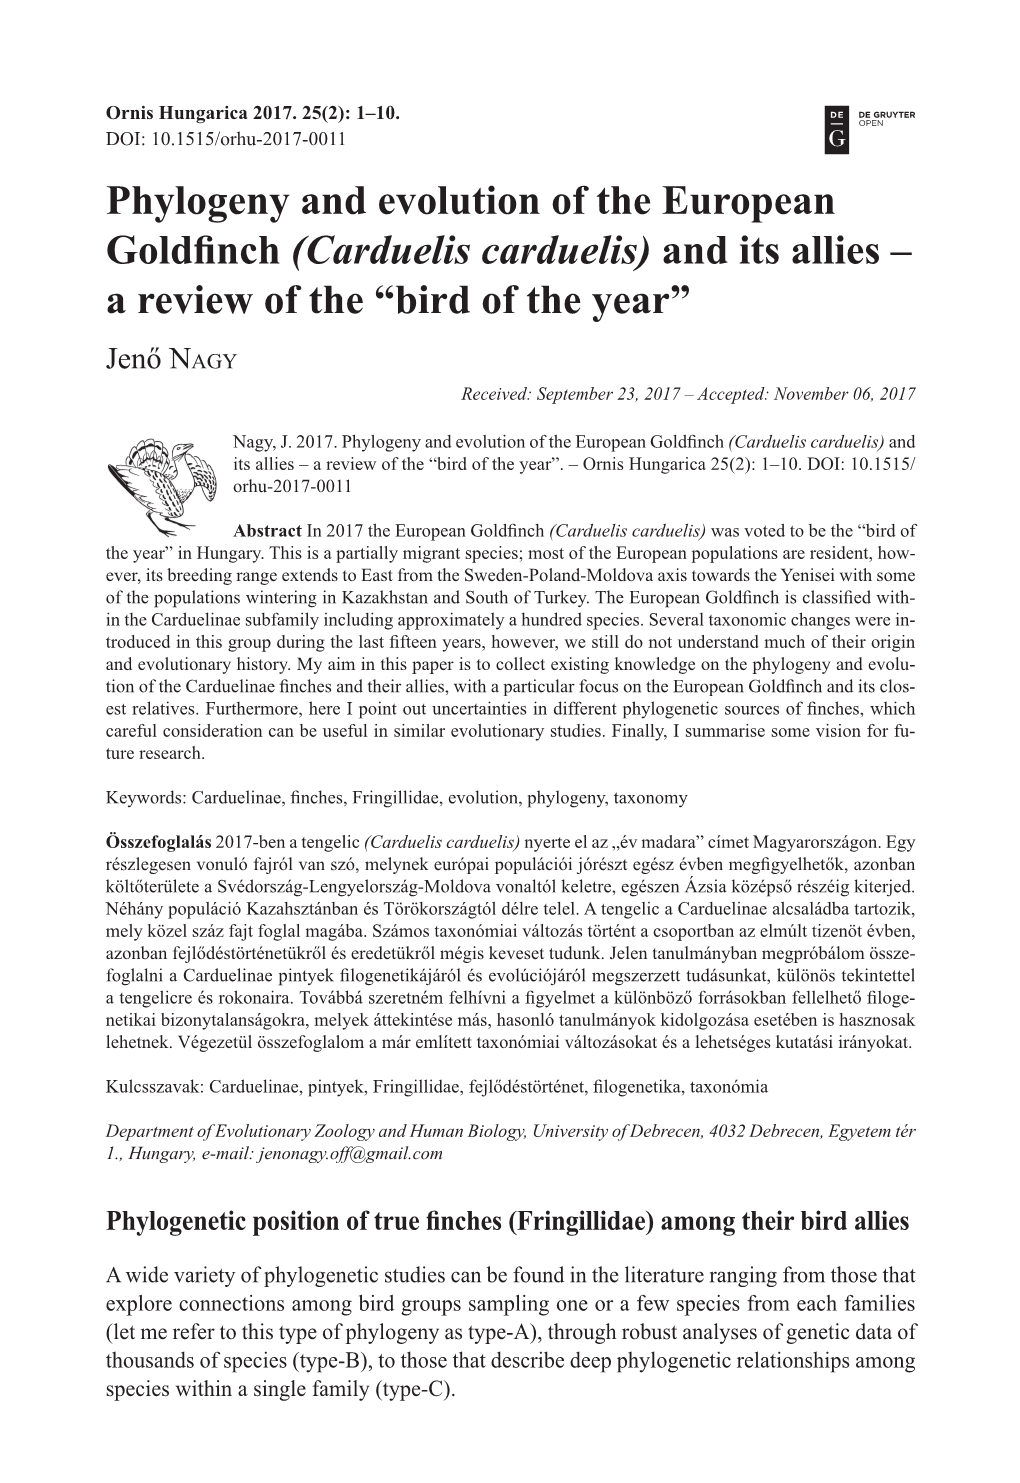 Phylogeny and Evolution of the European Goldfinch (Carduelis Carduelis) and Its Allies – a Review of the “Bird of the Year”